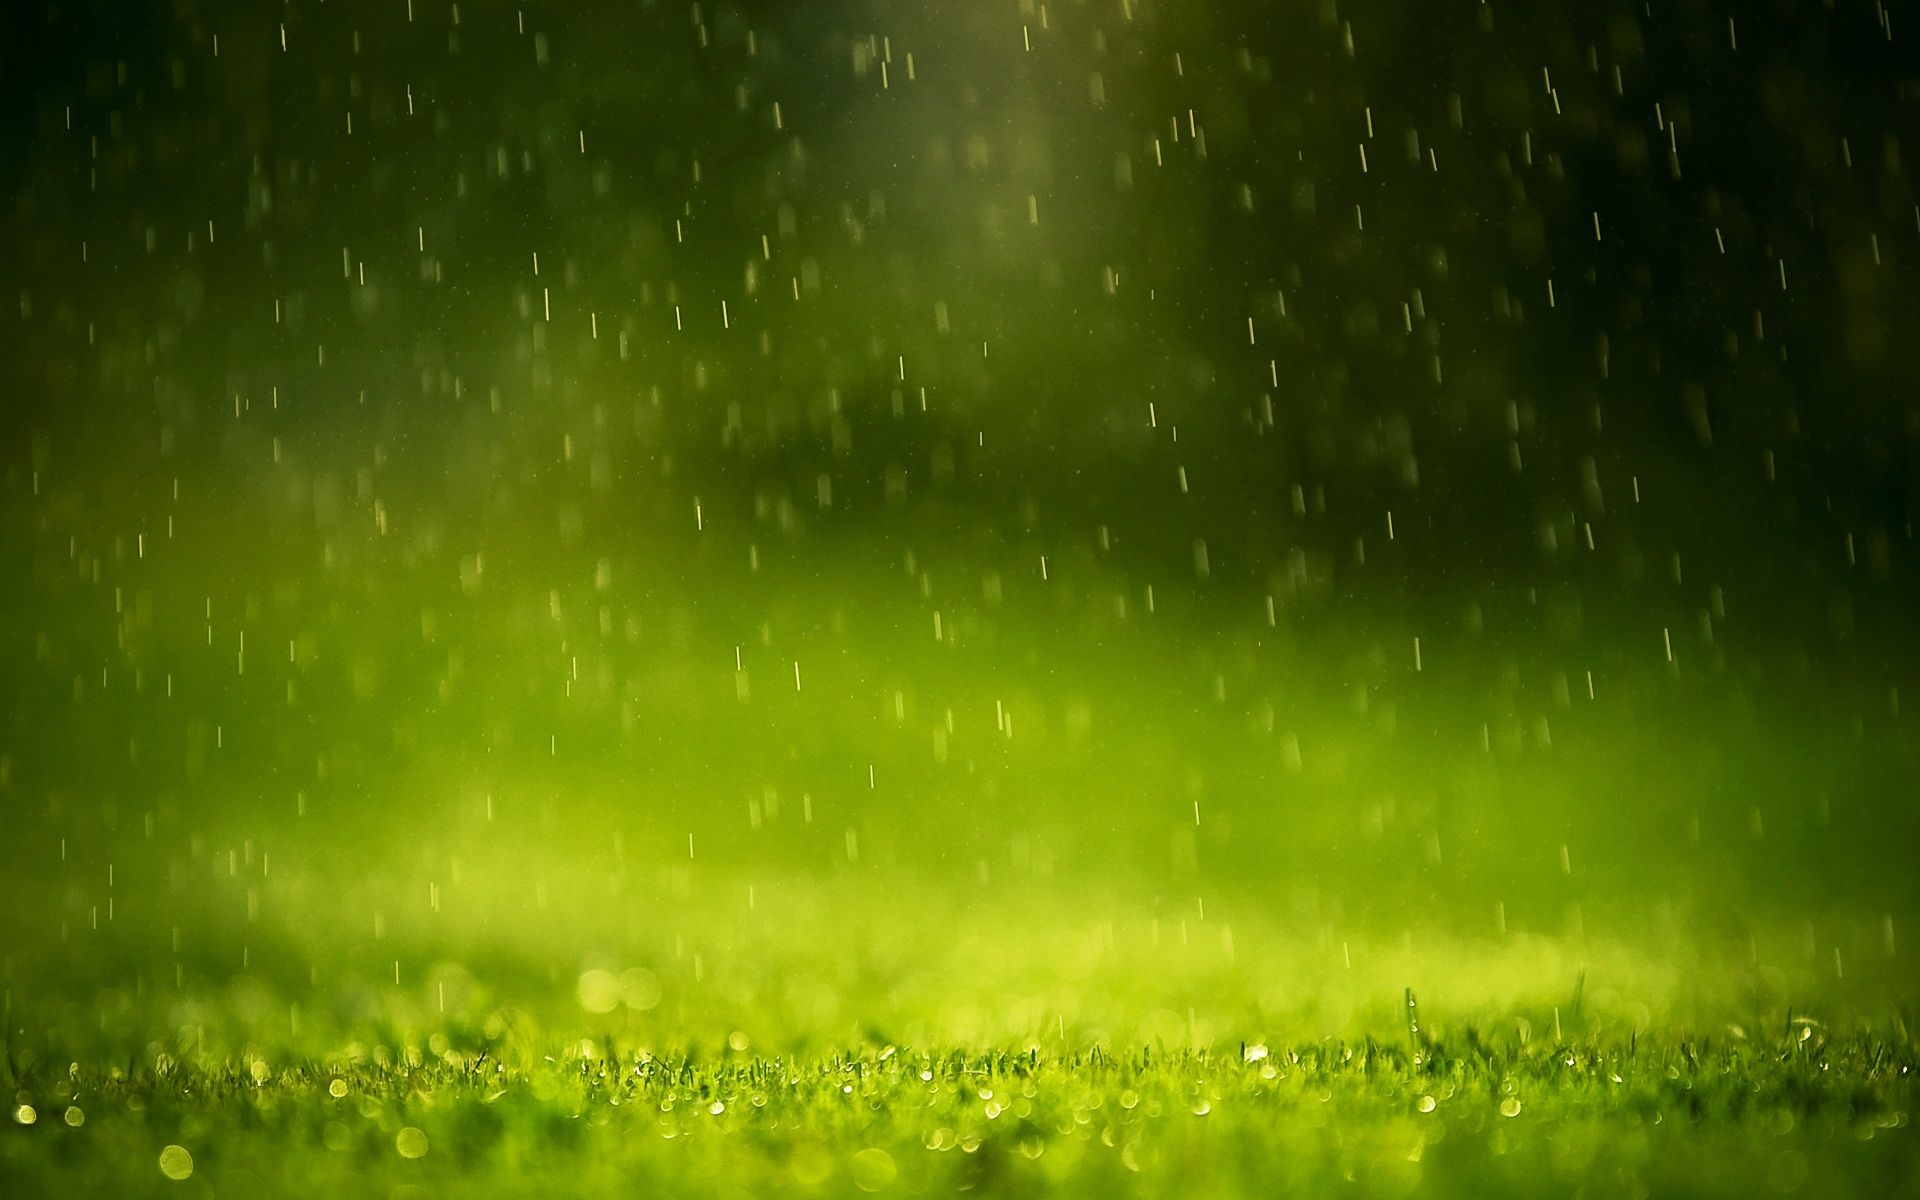 Rain Falling | HD Wallpapers | Pictures | Images | Backgrounds ...